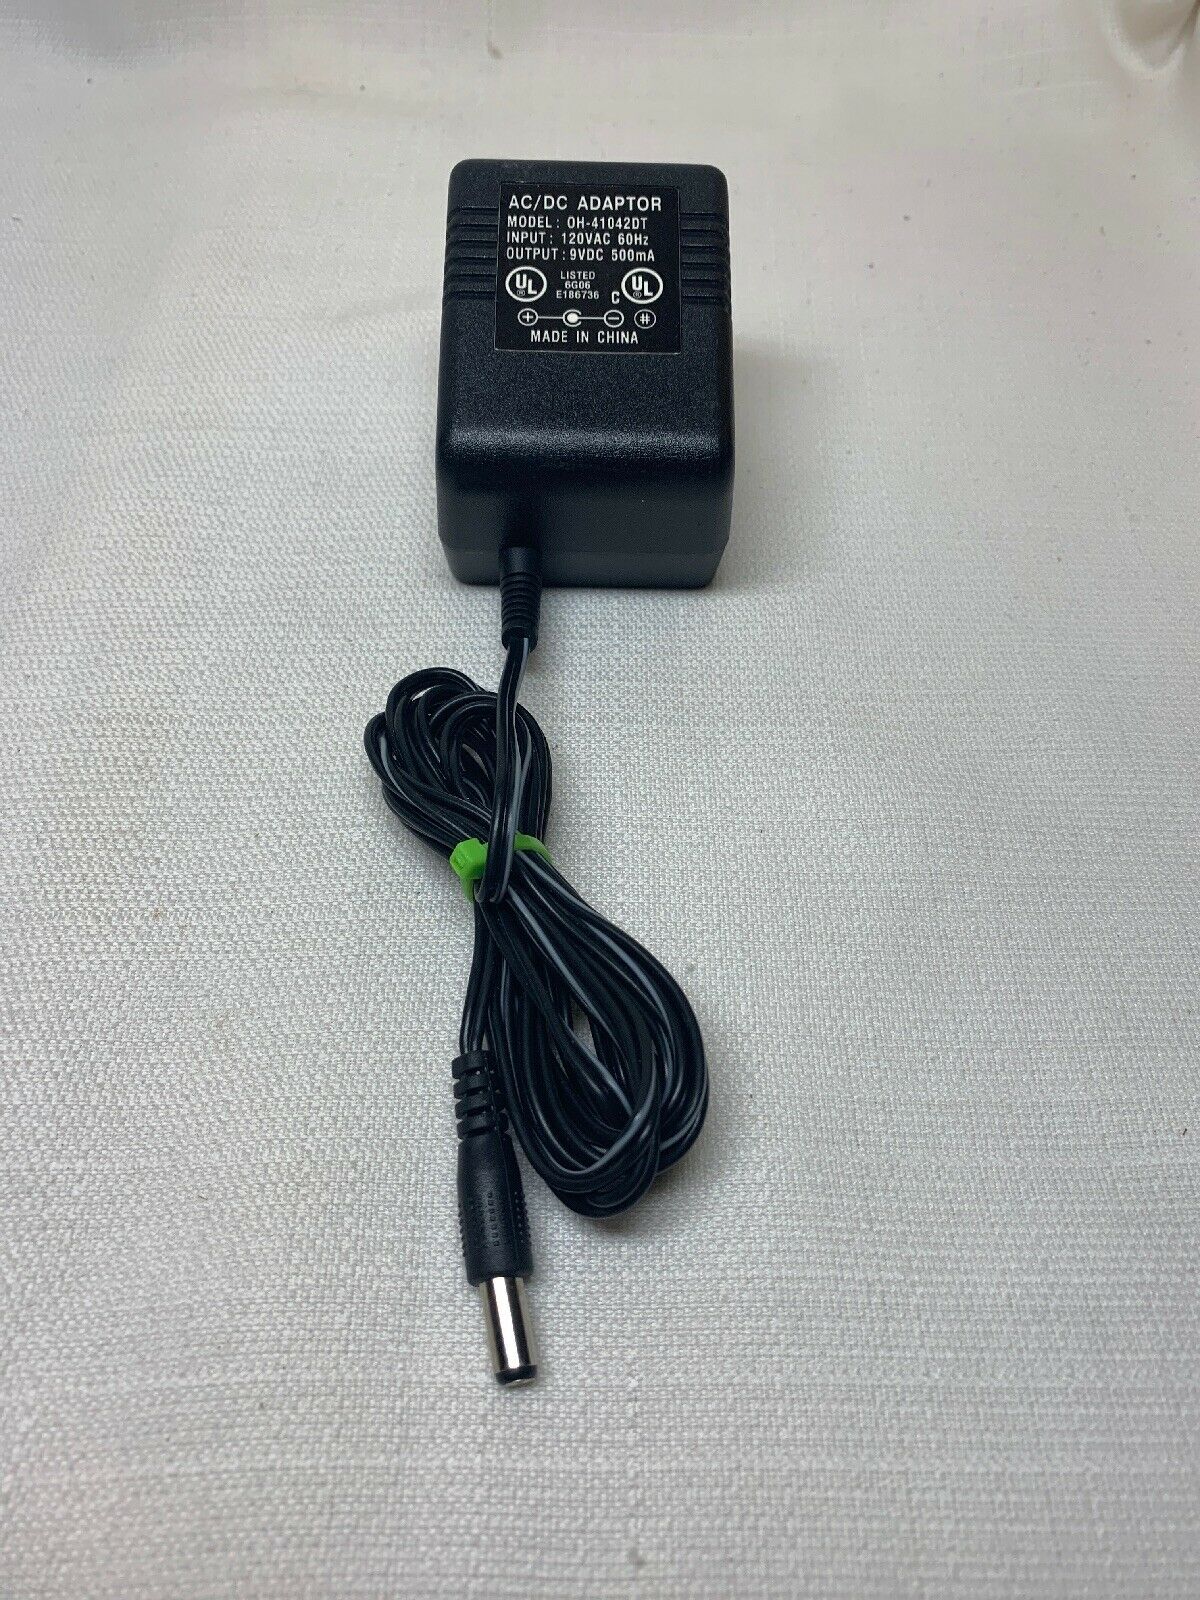 New 9V 500mA OH-41042DT Class 2 Transformer Power Supply Ac Adapter